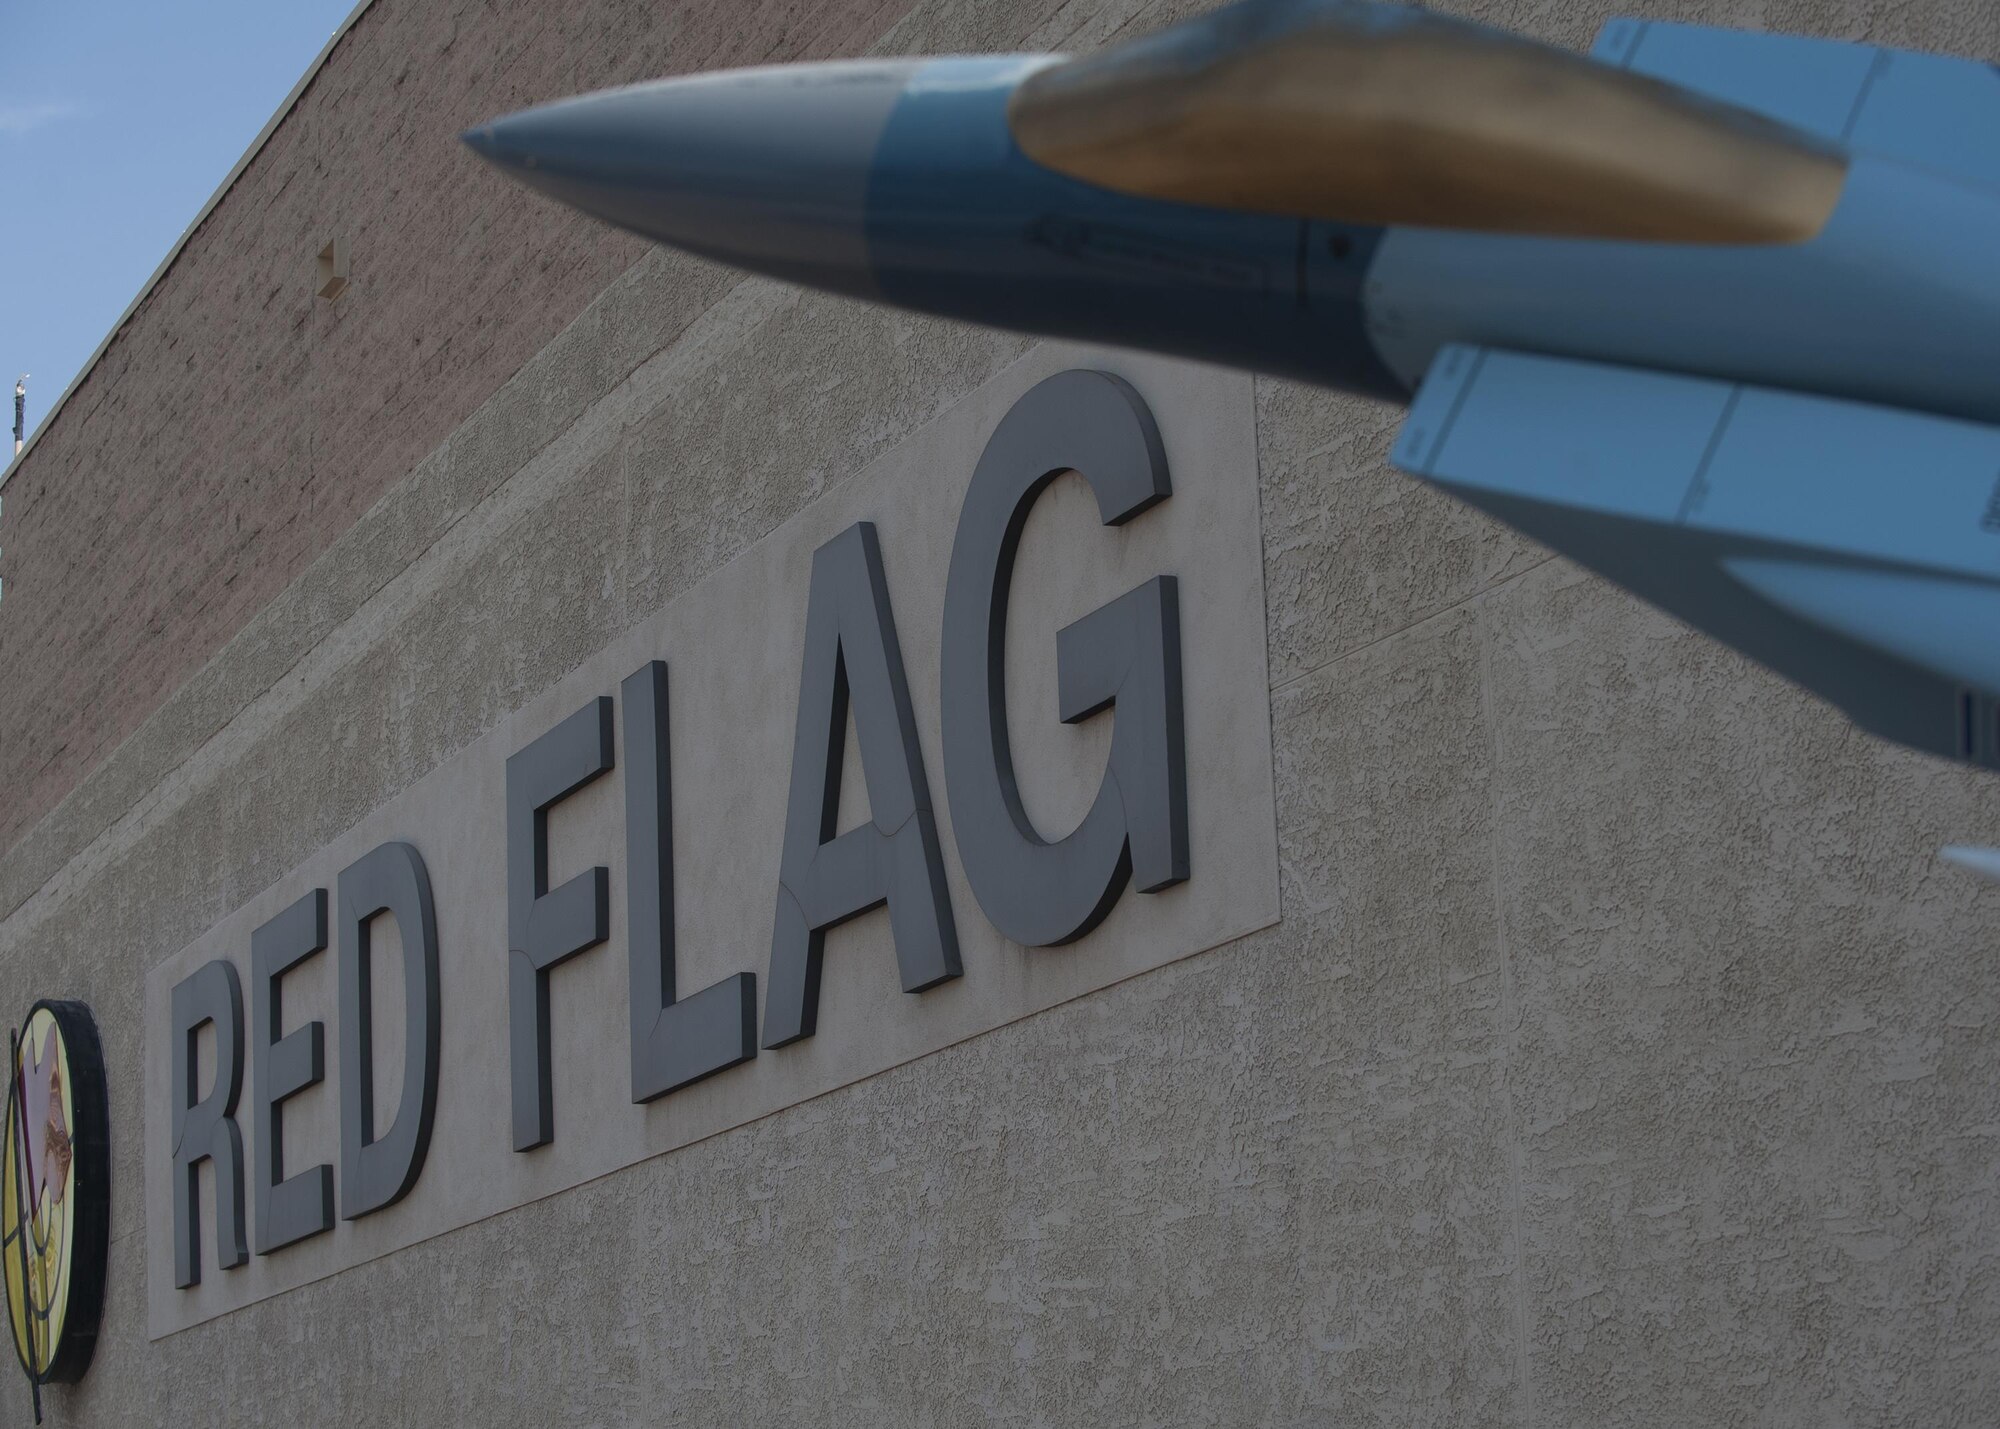 Nellis Air Force Base, Nev., is home to Red Flag exercises, which help train both U.S. and allied nations’combat air forces. The exercise gives pilots the experience of multiple, intensive air combat sorties in the safety of a training environment. (U.S. Air Force photo by Senior Airman Justyn Freeman)